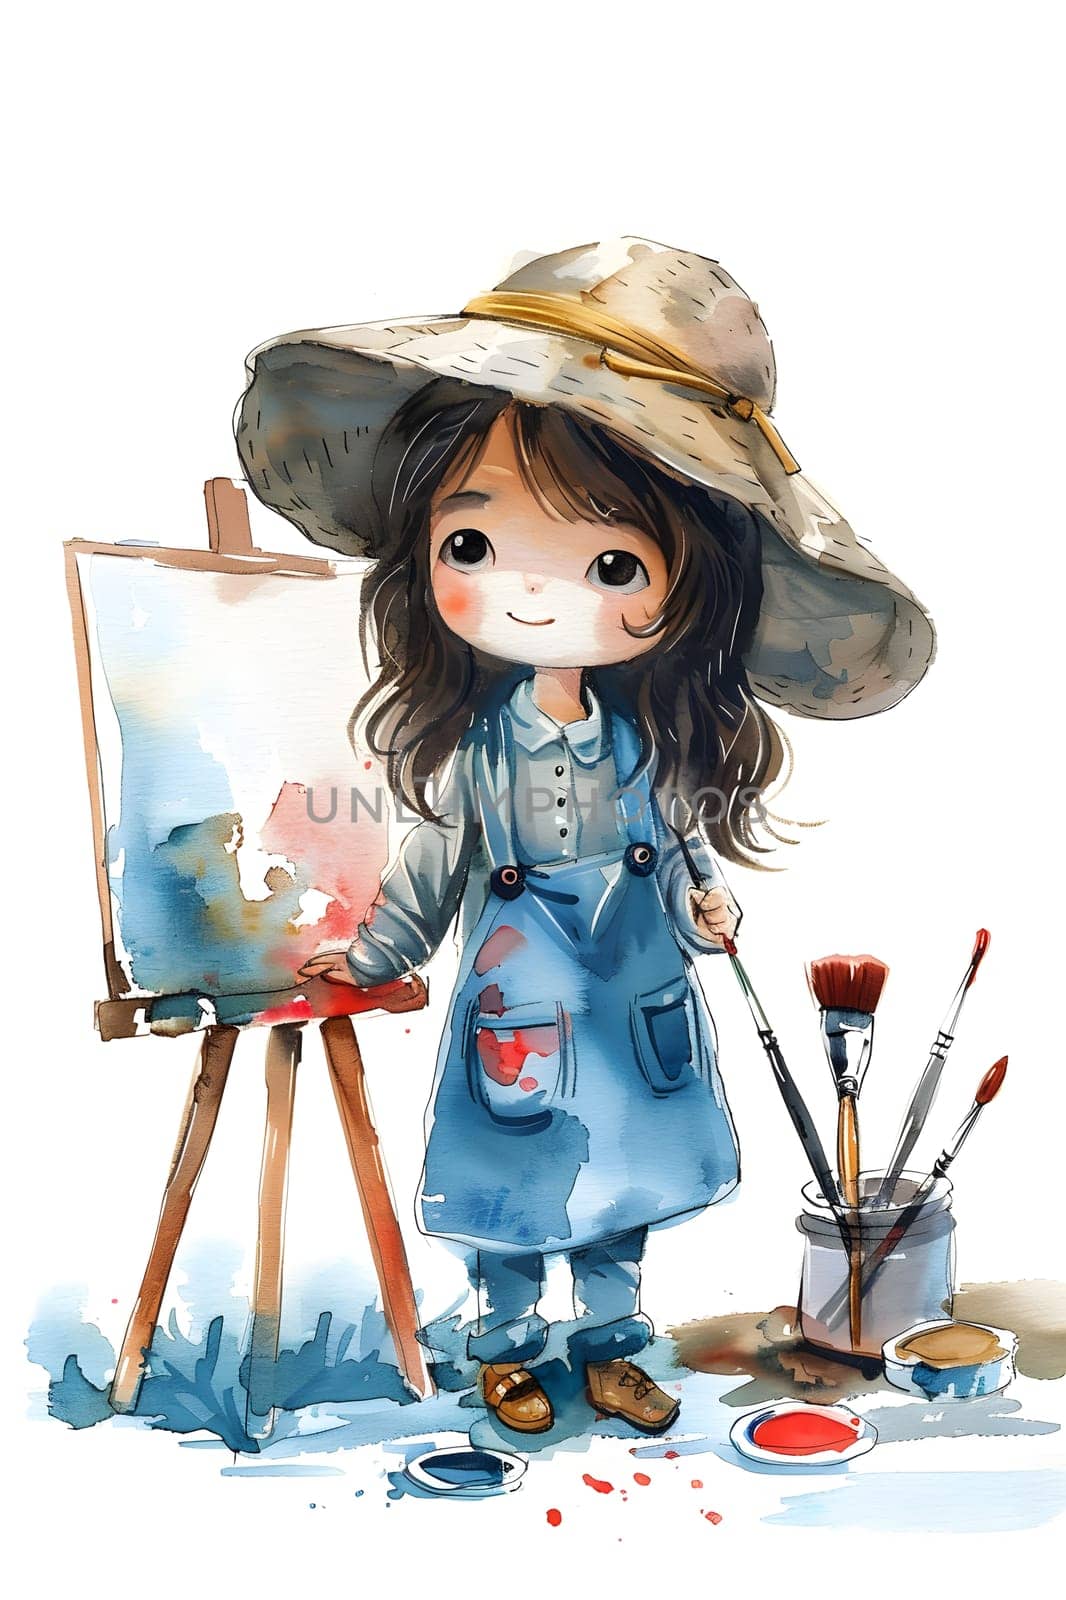 A little girl is creating art on an easel, painting a picture while wearing a sun hat. She is also showcasing her fashion design skills by choosing different costume hats for her dolls